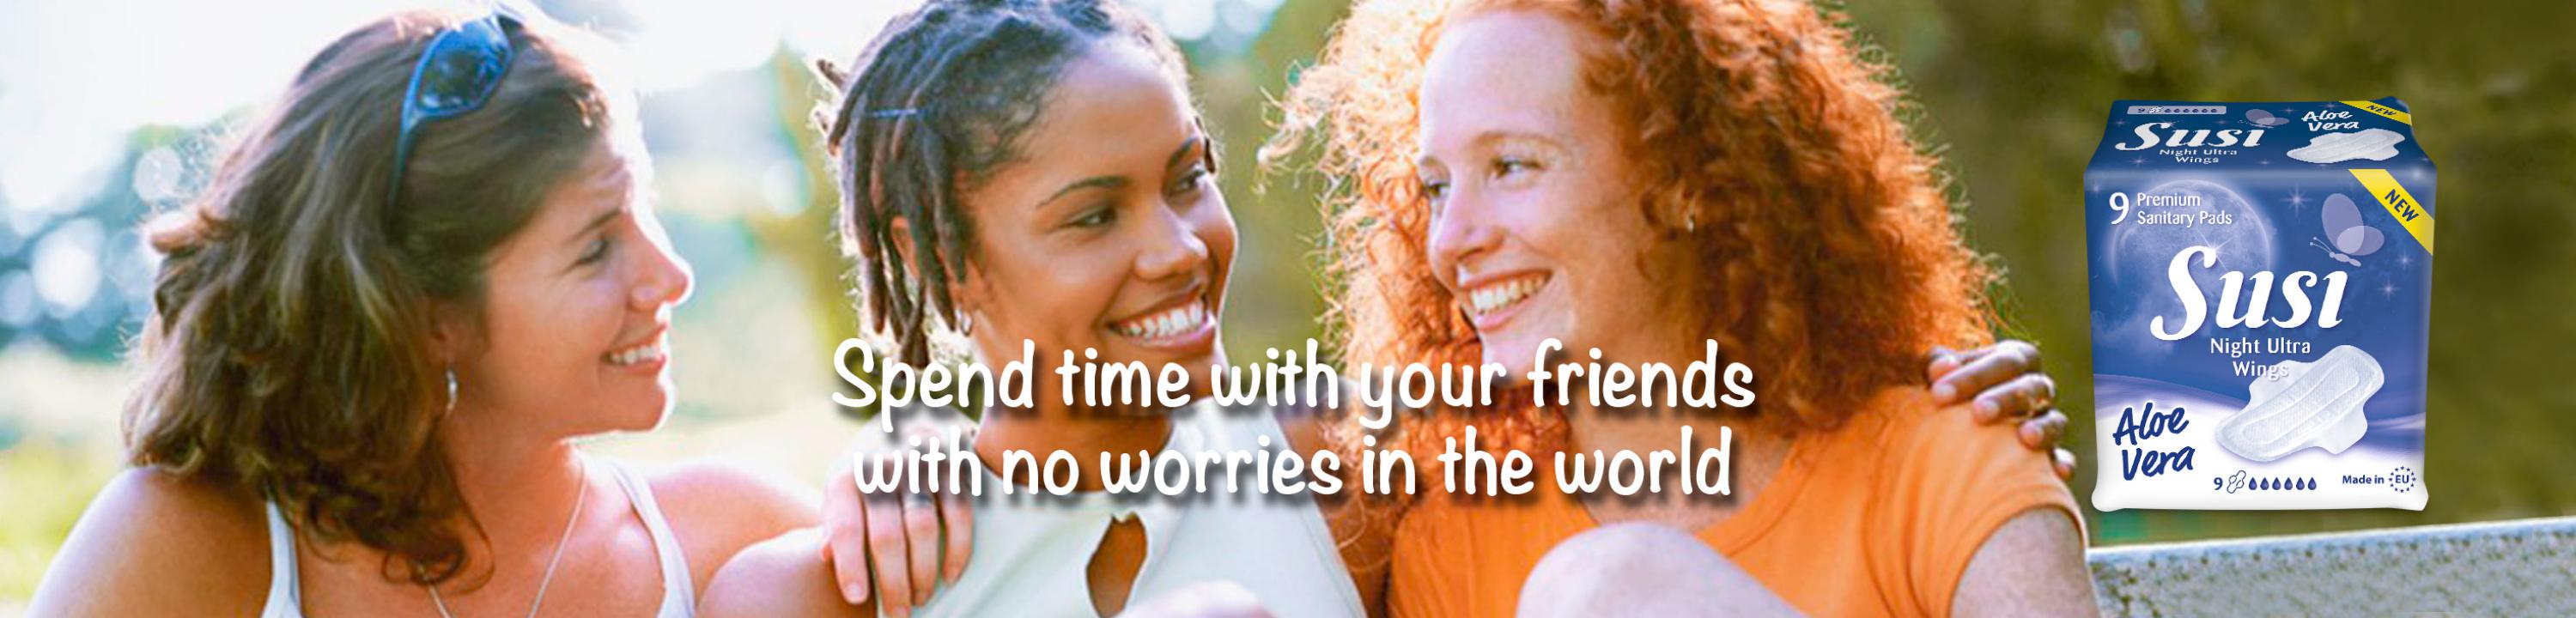 Spend time with your Friends with no worries in the world